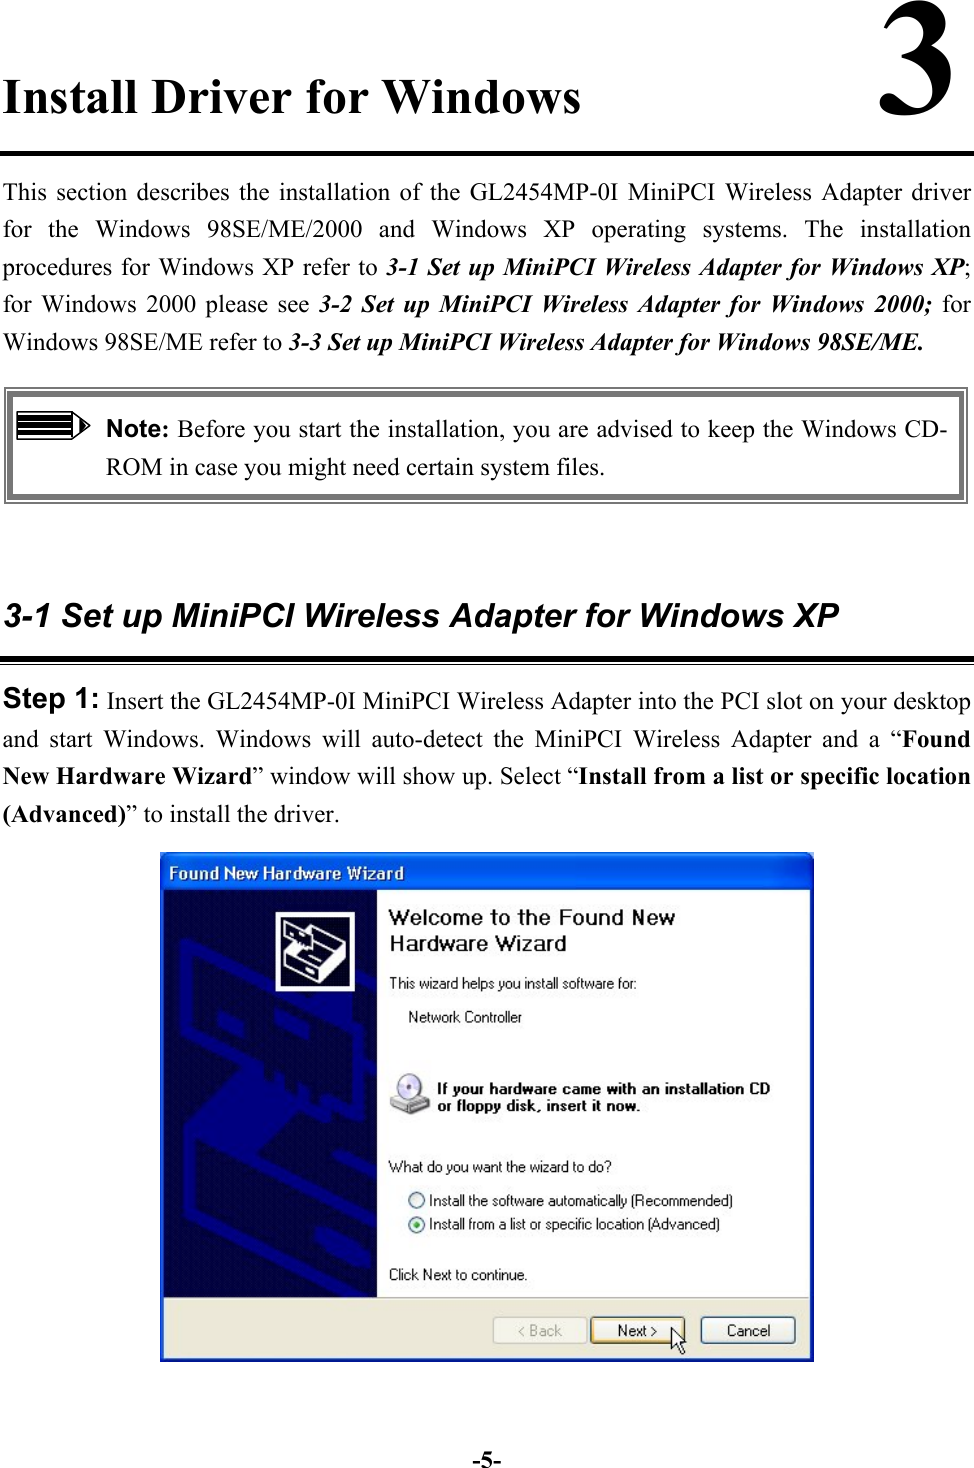 -5-Install Driver for Windows            3This section describes the installation of the GL2454MP-0I MiniPCI Wireless Adapter driverfor the Windows 98SE/ME/2000 and Windows XP operating systems. The installationprocedures for Windows XP refer to 3-1 Set up MiniPCI Wireless Adapter for Windows XP;for Windows 2000 please see 3-2 Set up MiniPCI Wireless Adapter for Windows 2000; forWindows 98SE/ME refer to 3-3 Set up MiniPCI Wireless Adapter for Windows 98SE/ME.Note: Before you start the installation, you are advised to keep the Windows CD-ROM in case you might need certain system files.3-1 Set up MiniPCI Wireless Adapter for Windows XPStep 1: Insert the GL2454MP-0I MiniPCI Wireless Adapter into the PCI slot on your desktopand start Windows. Windows will auto-detect the MiniPCI Wireless Adapter and a “FoundNew Hardware Wizard” window will show up. Select “Install from a list or specific location(Advanced)” to install the driver.